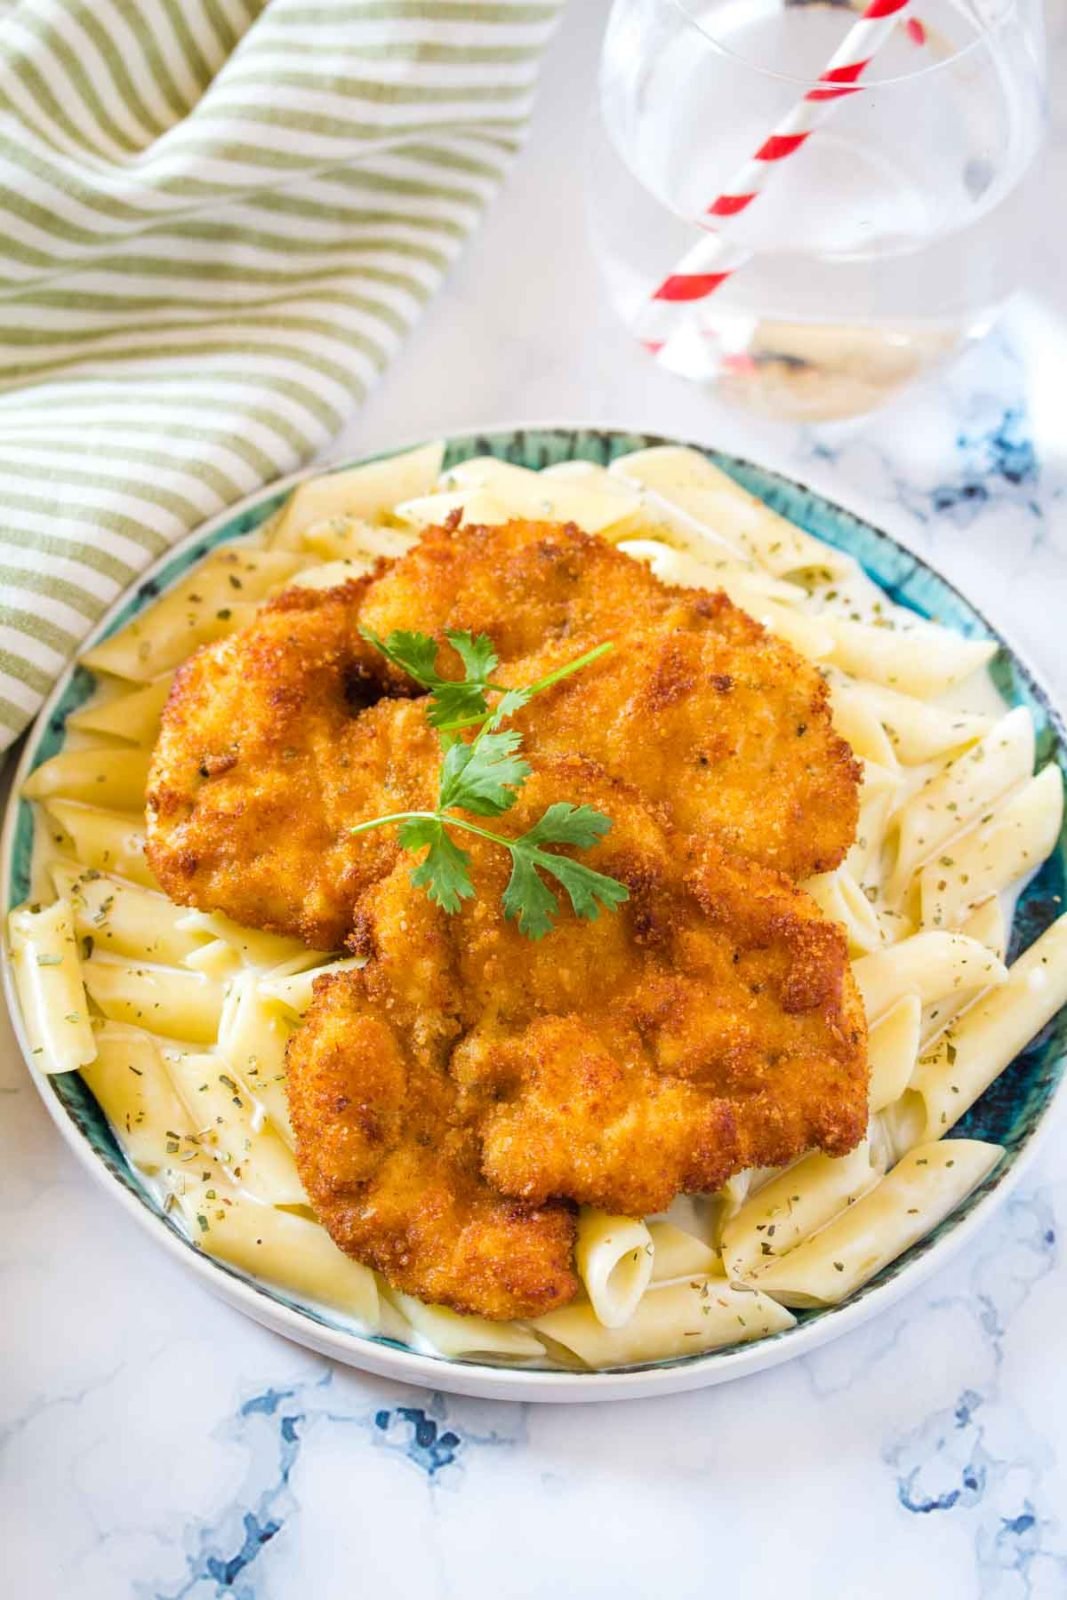 Two Breaded Chicken Cutlets served with Garlic Pasta on a blue plate